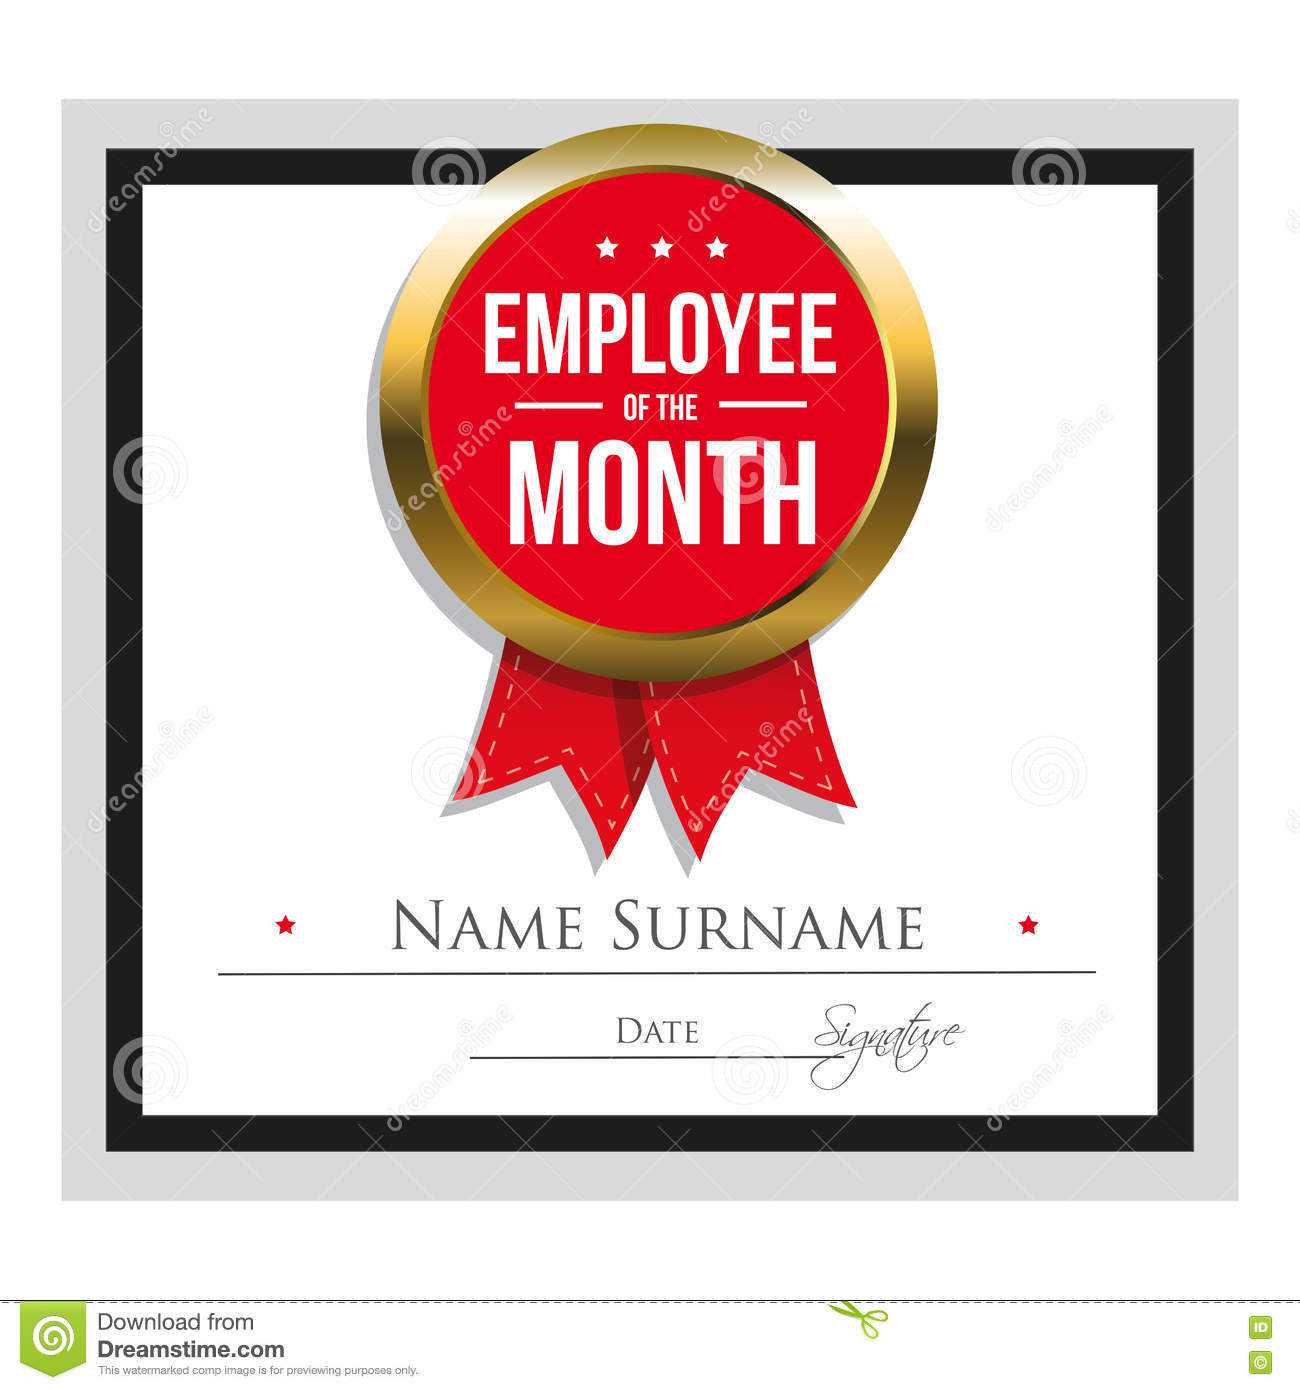 Employee Of The Month Certificate Template Stock Vector Pertaining To Employee Of The Month Certificate Templates